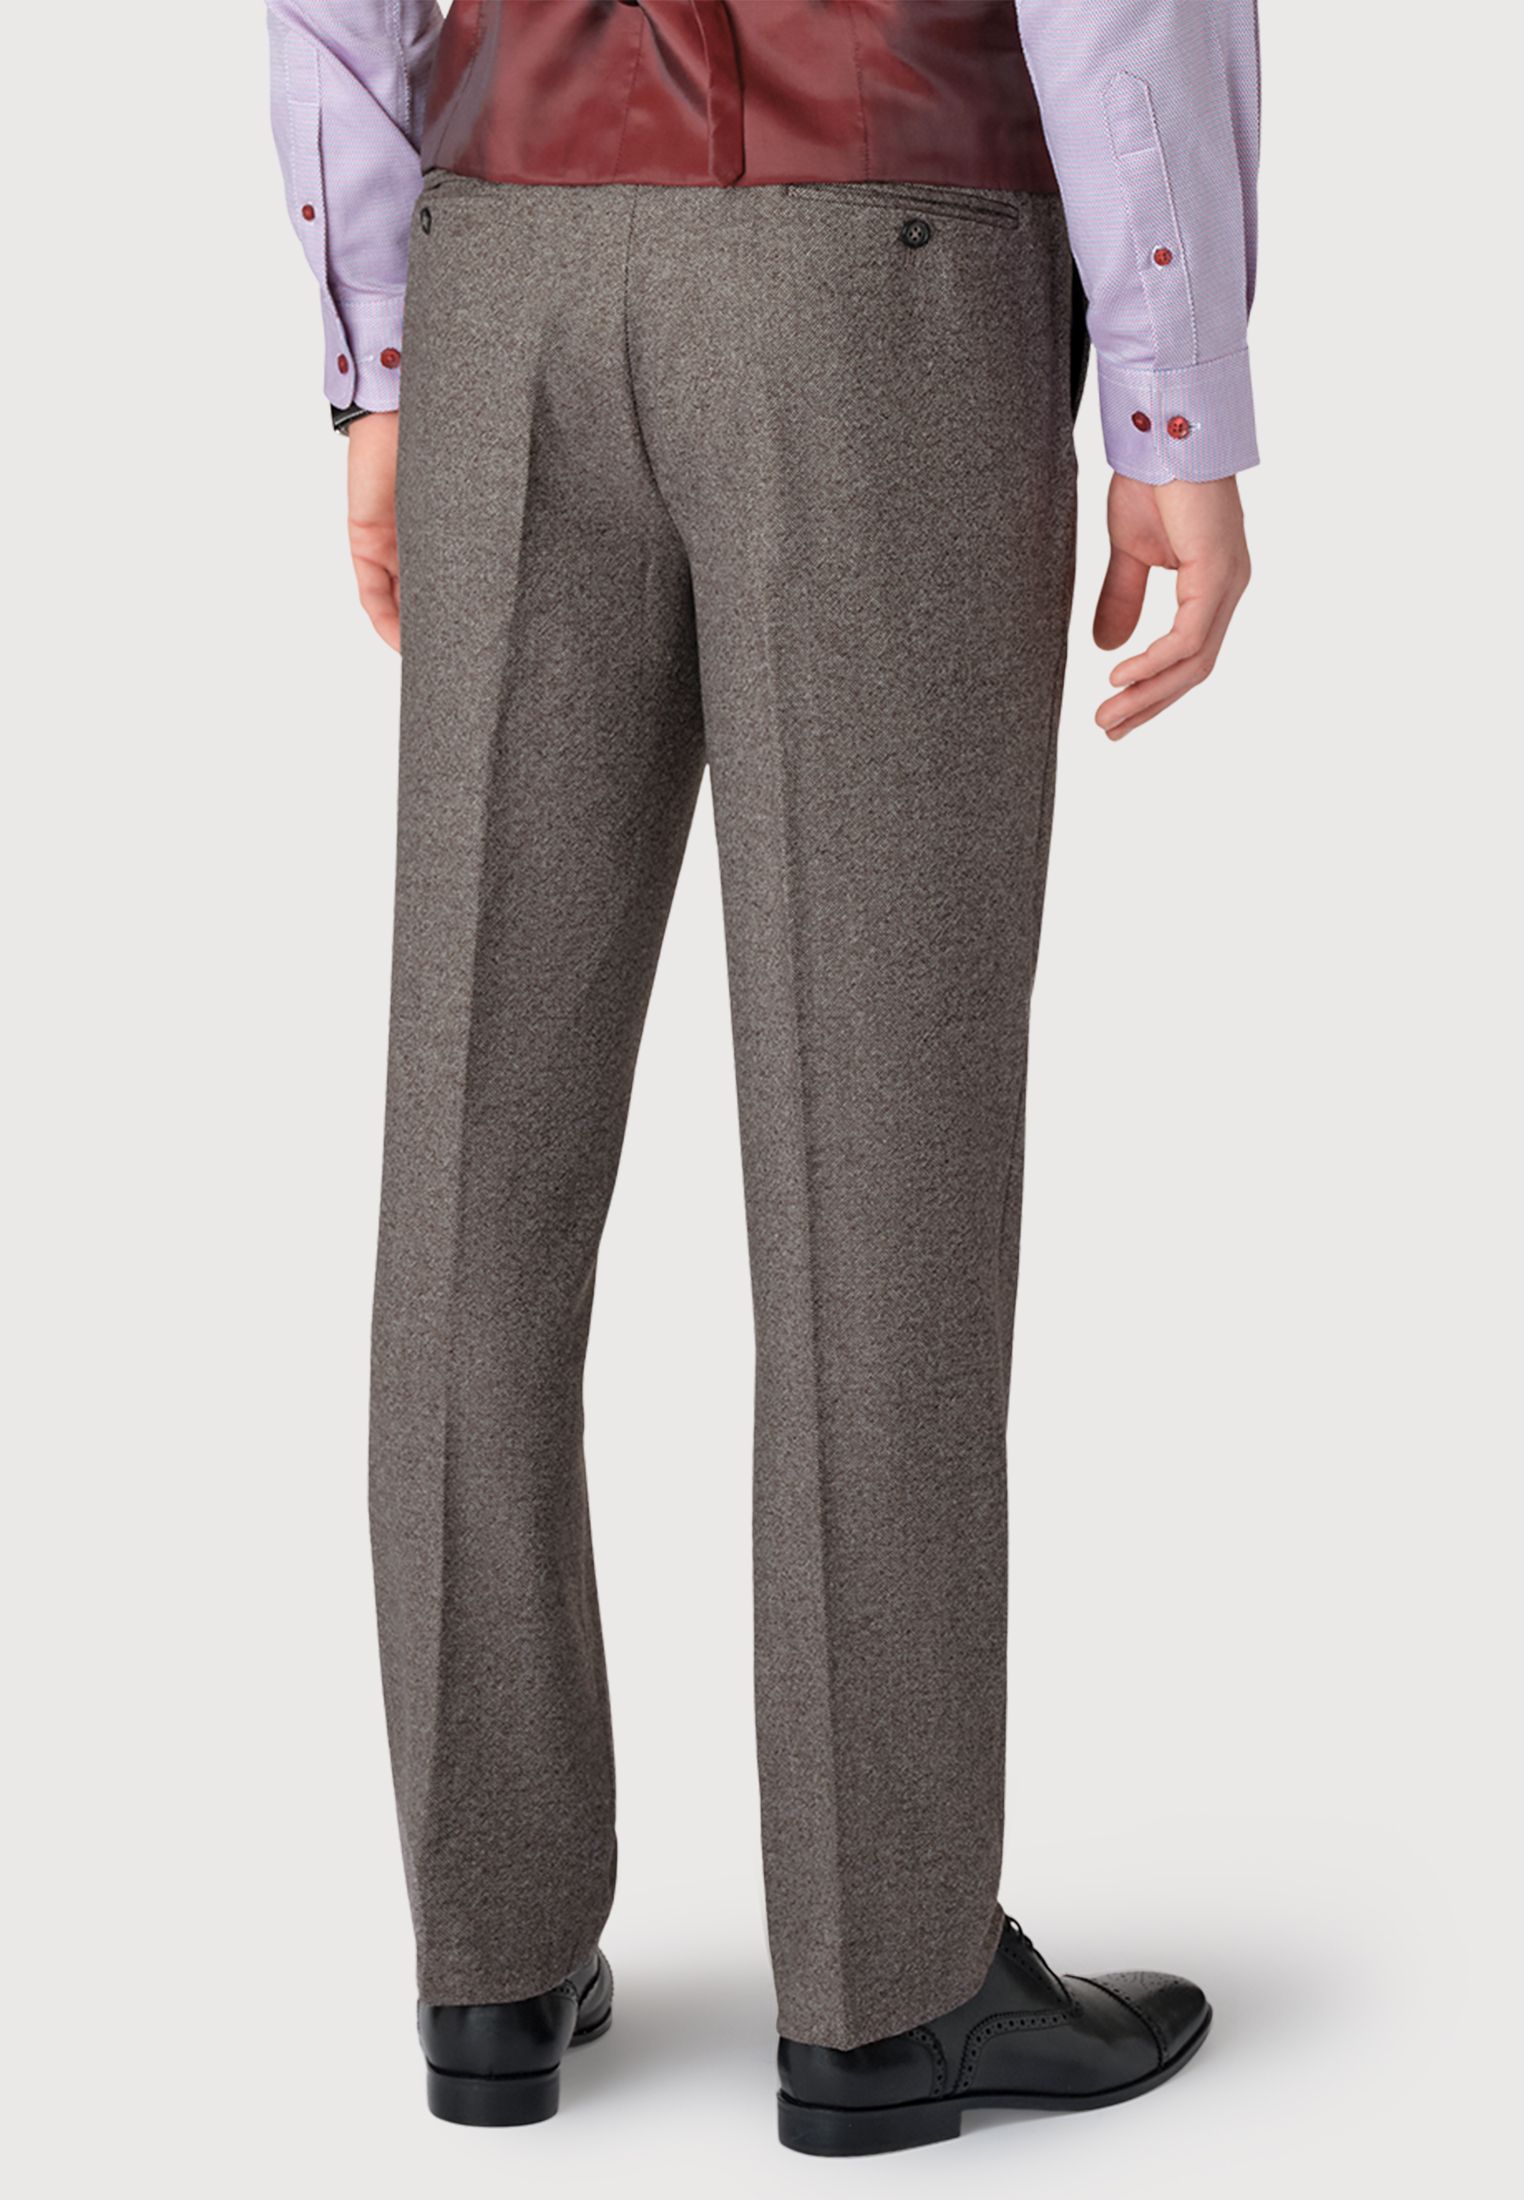 Clifford Grey Donegal Wool Tailored Fit Suit Pants